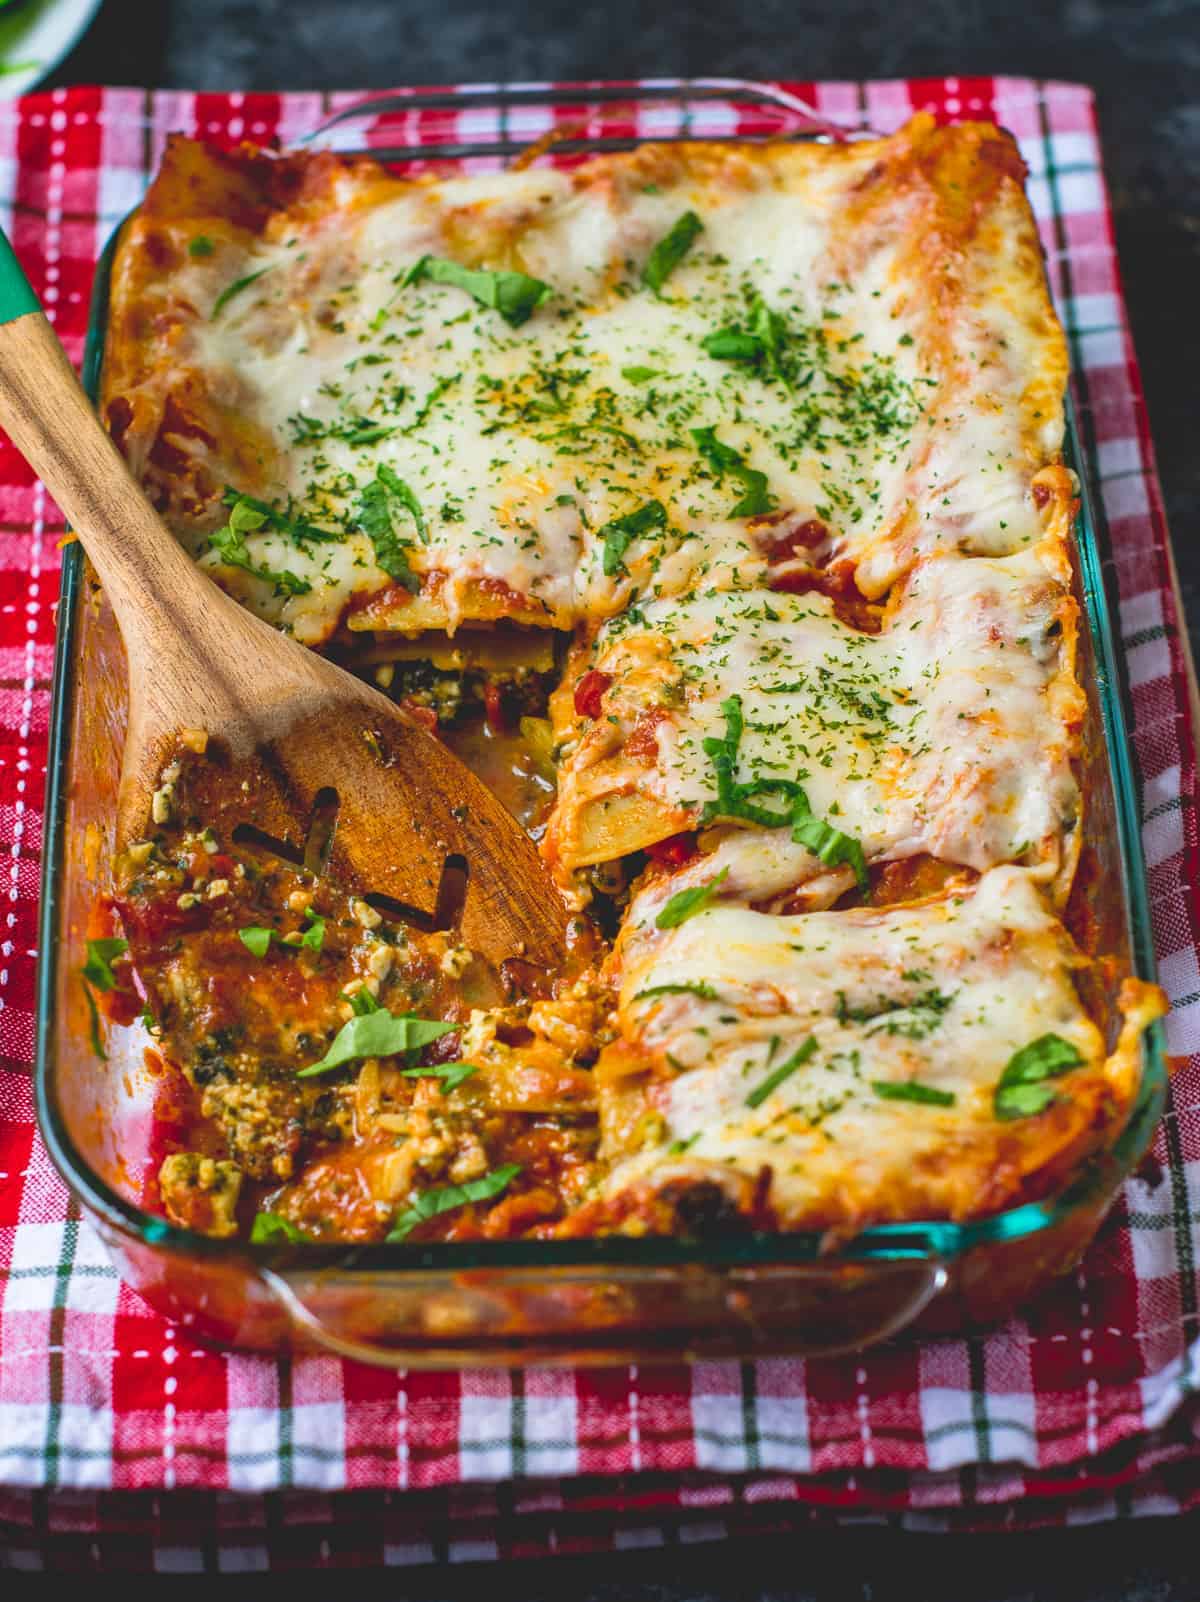 Veggie lasagna in a baking pan with a serving spoon